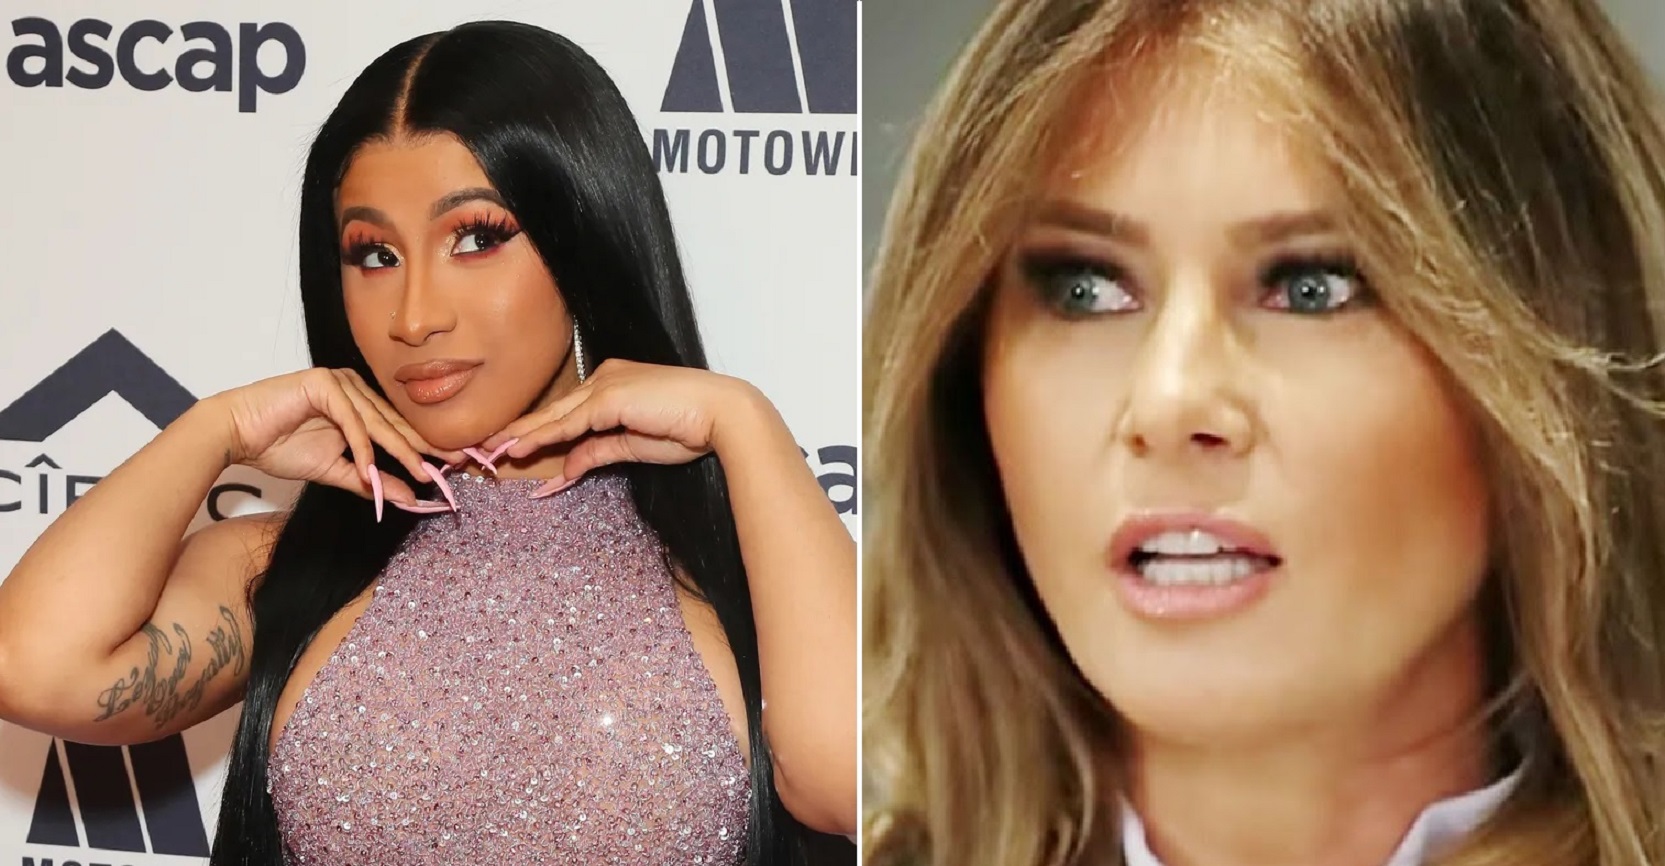 Cardi B Calls Out Melania Trump: “Didn’t She Used To Sell That WAP?”